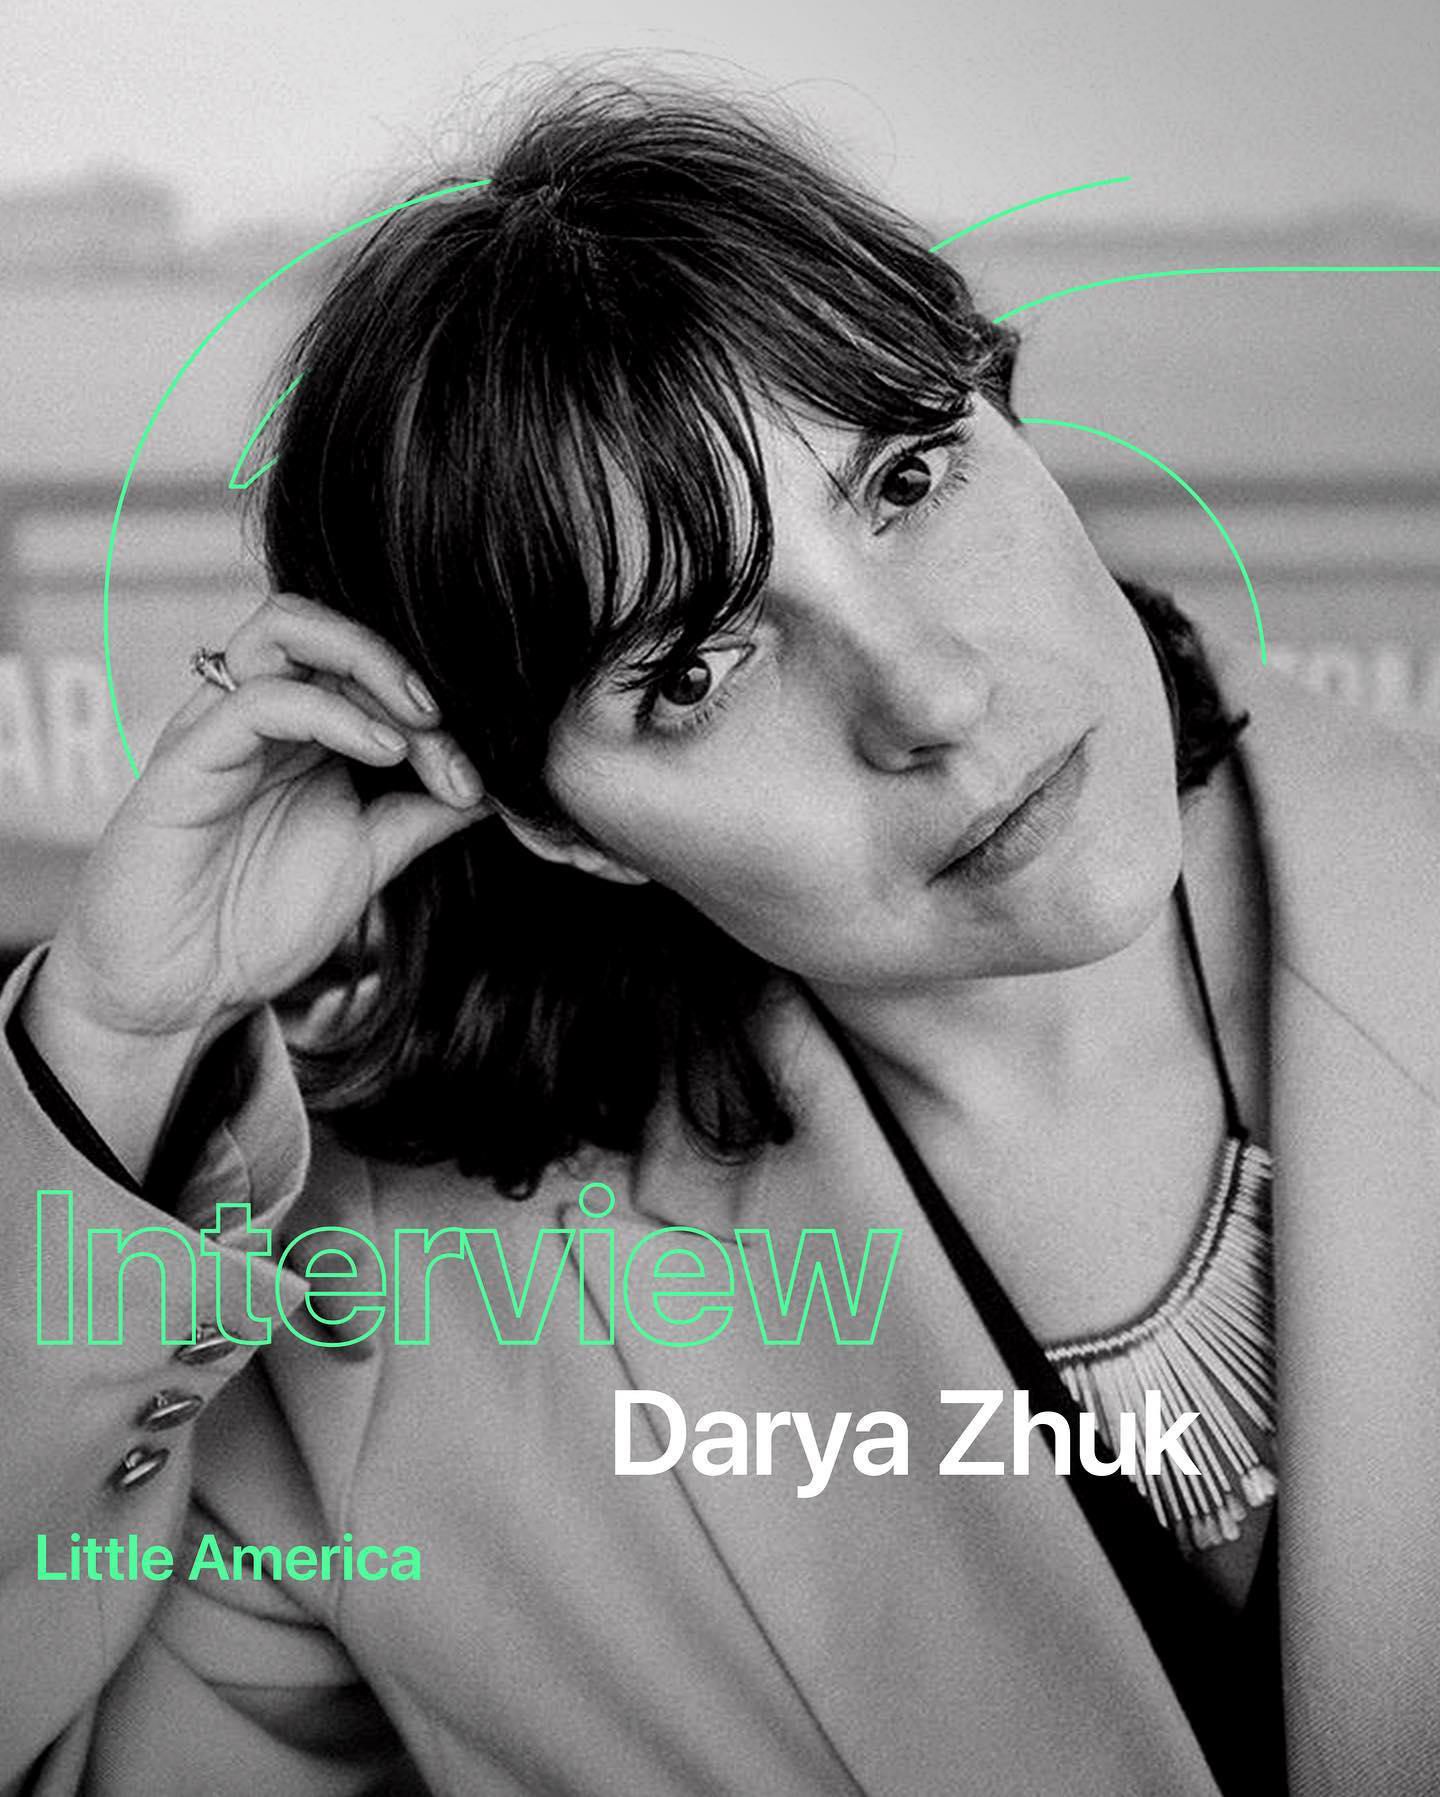 Apple TV+ - Darya Zhuk (#dragonzhuk) brought her own immigrant story to the small screen by directin